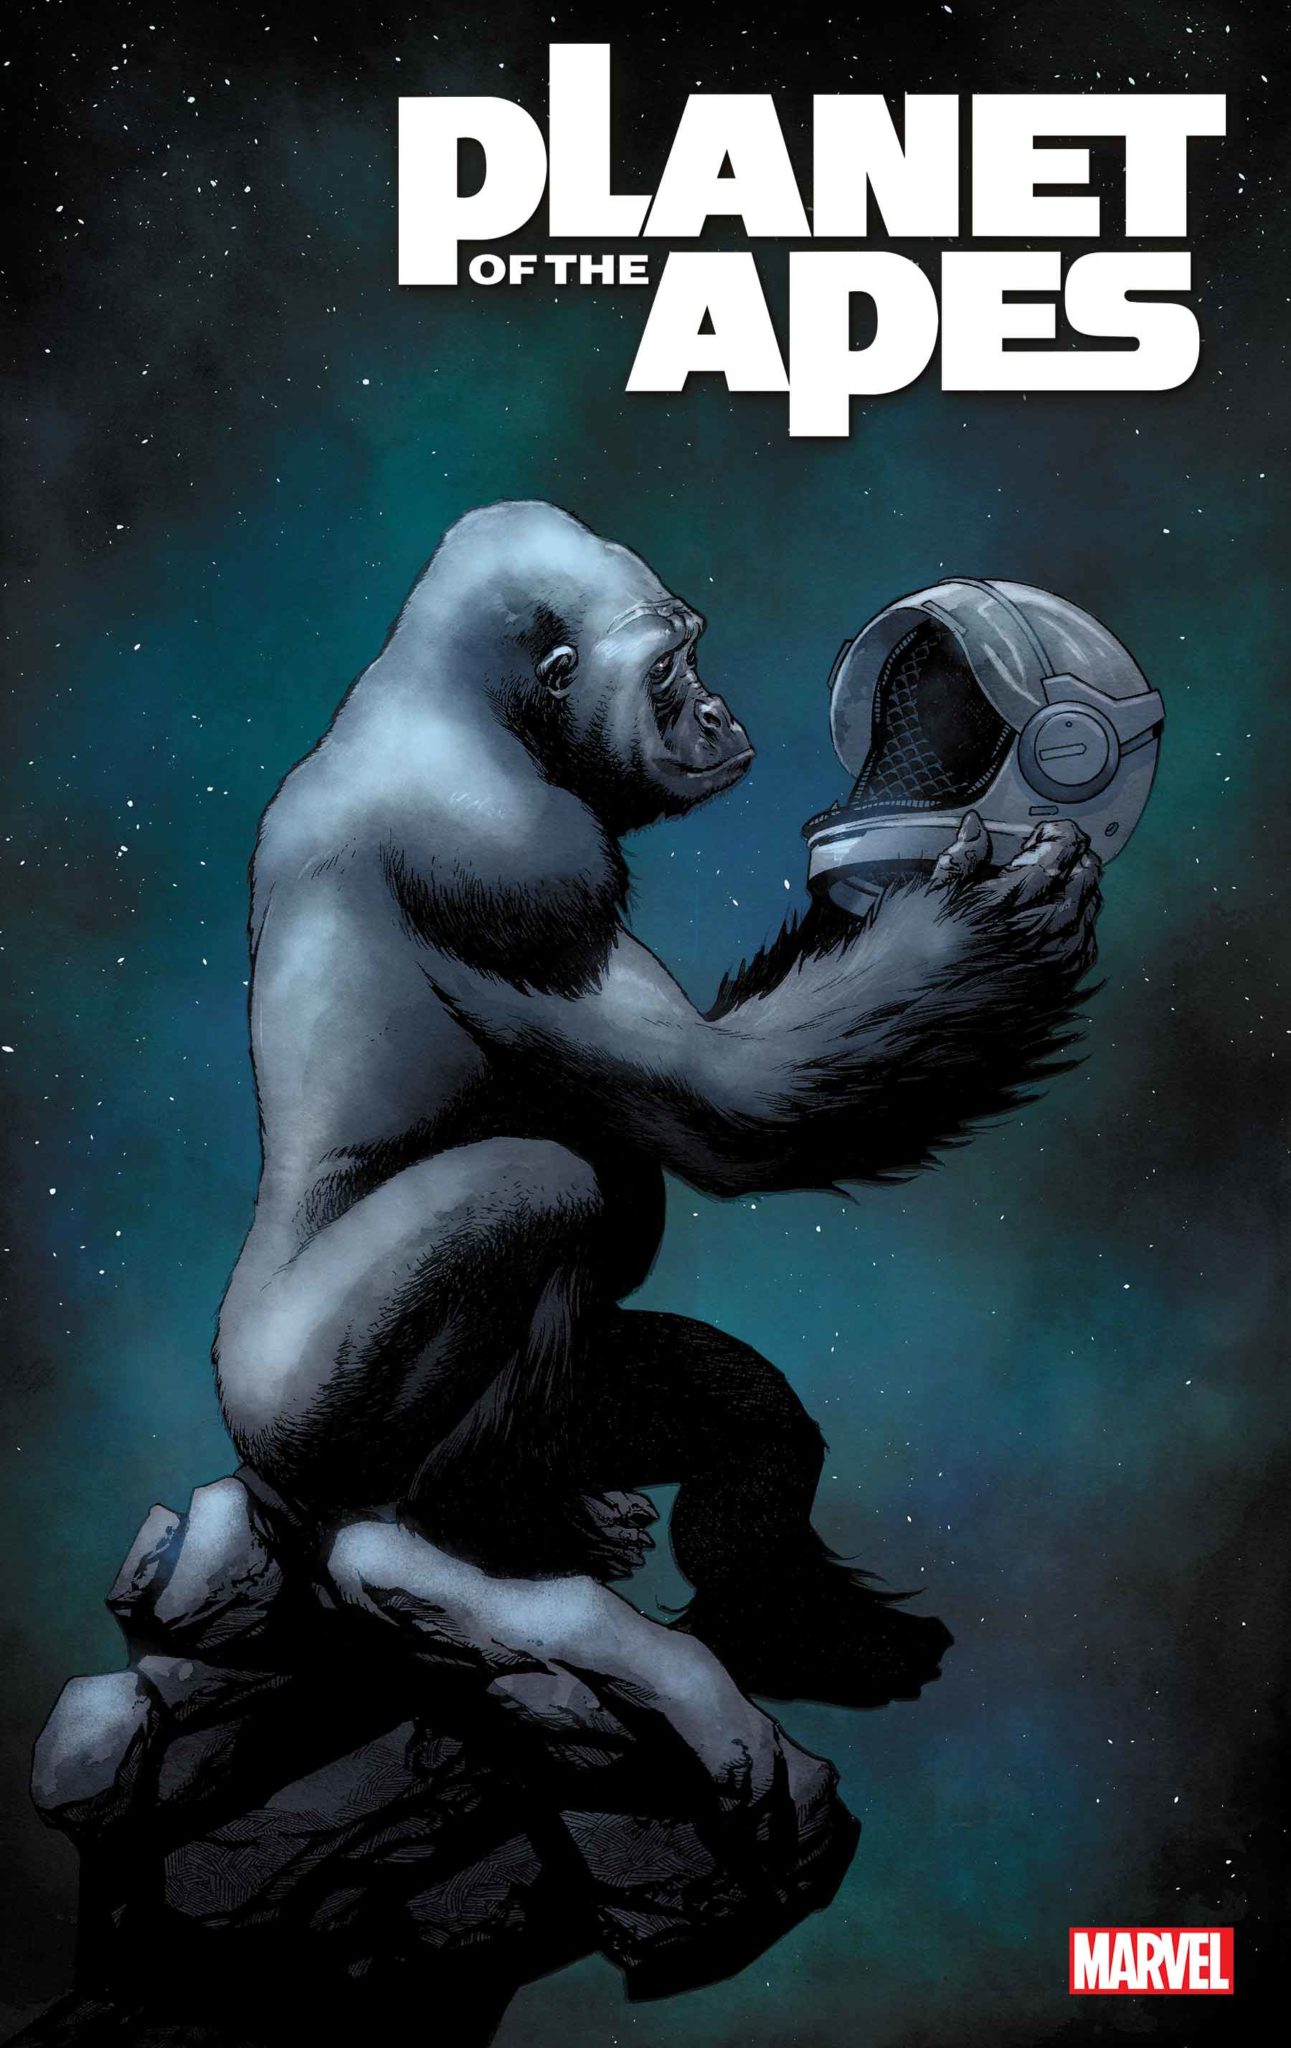 PLANET OF THE APES #1 variant cover